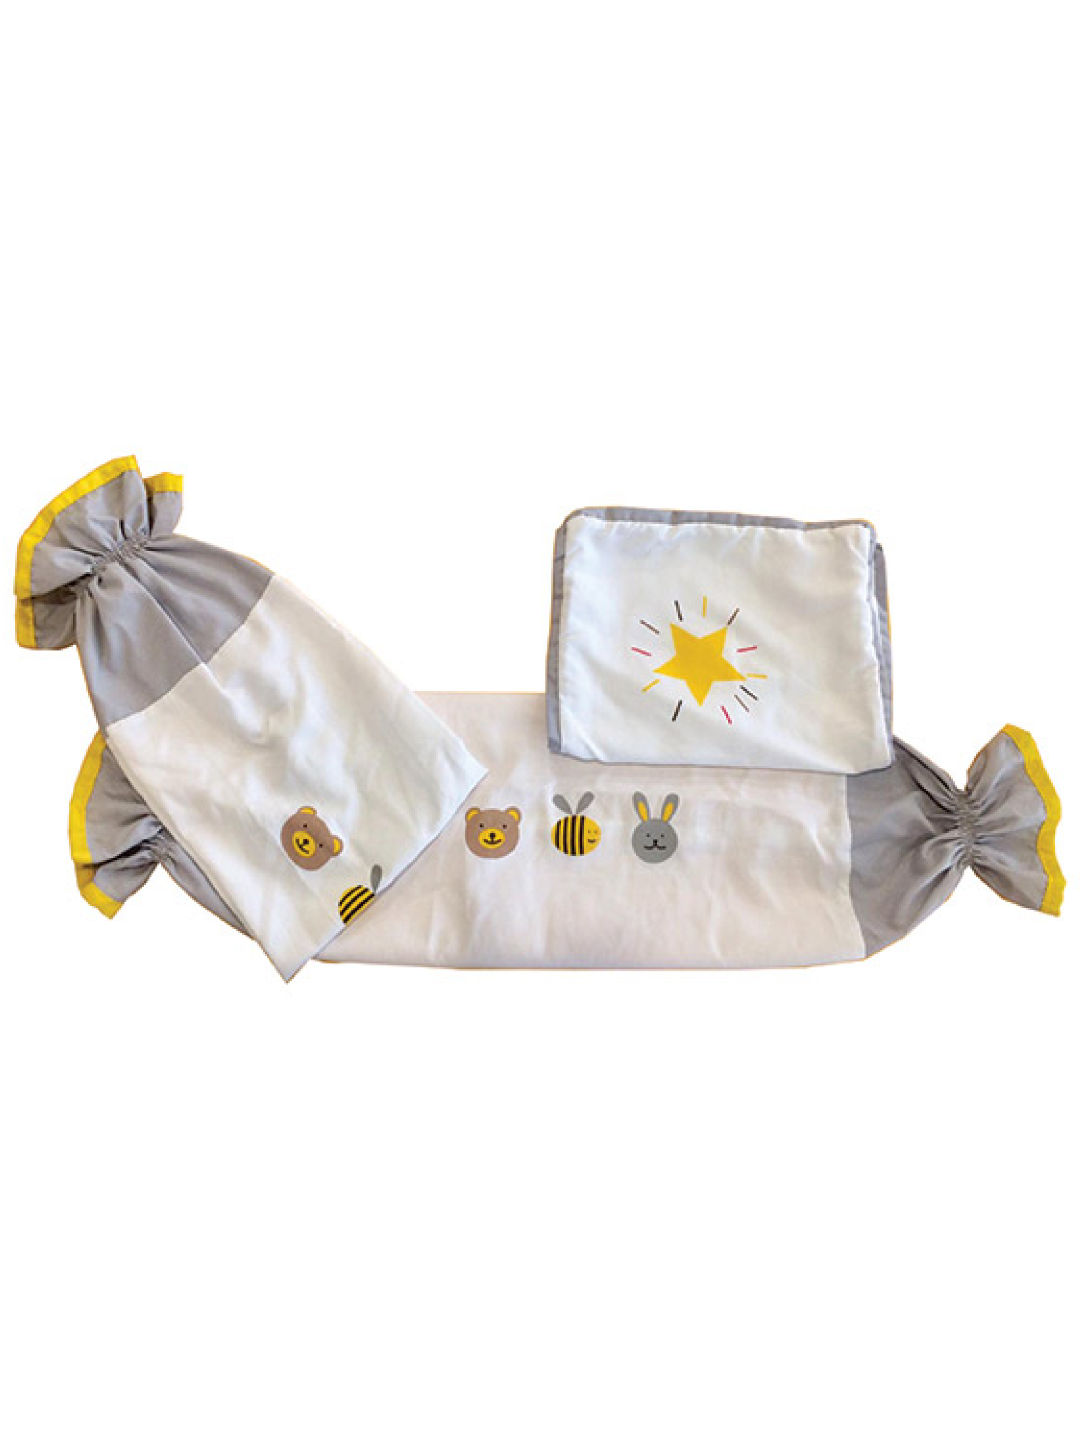 Kozy Blankie A Little Star Pillow Case and Bolster Case